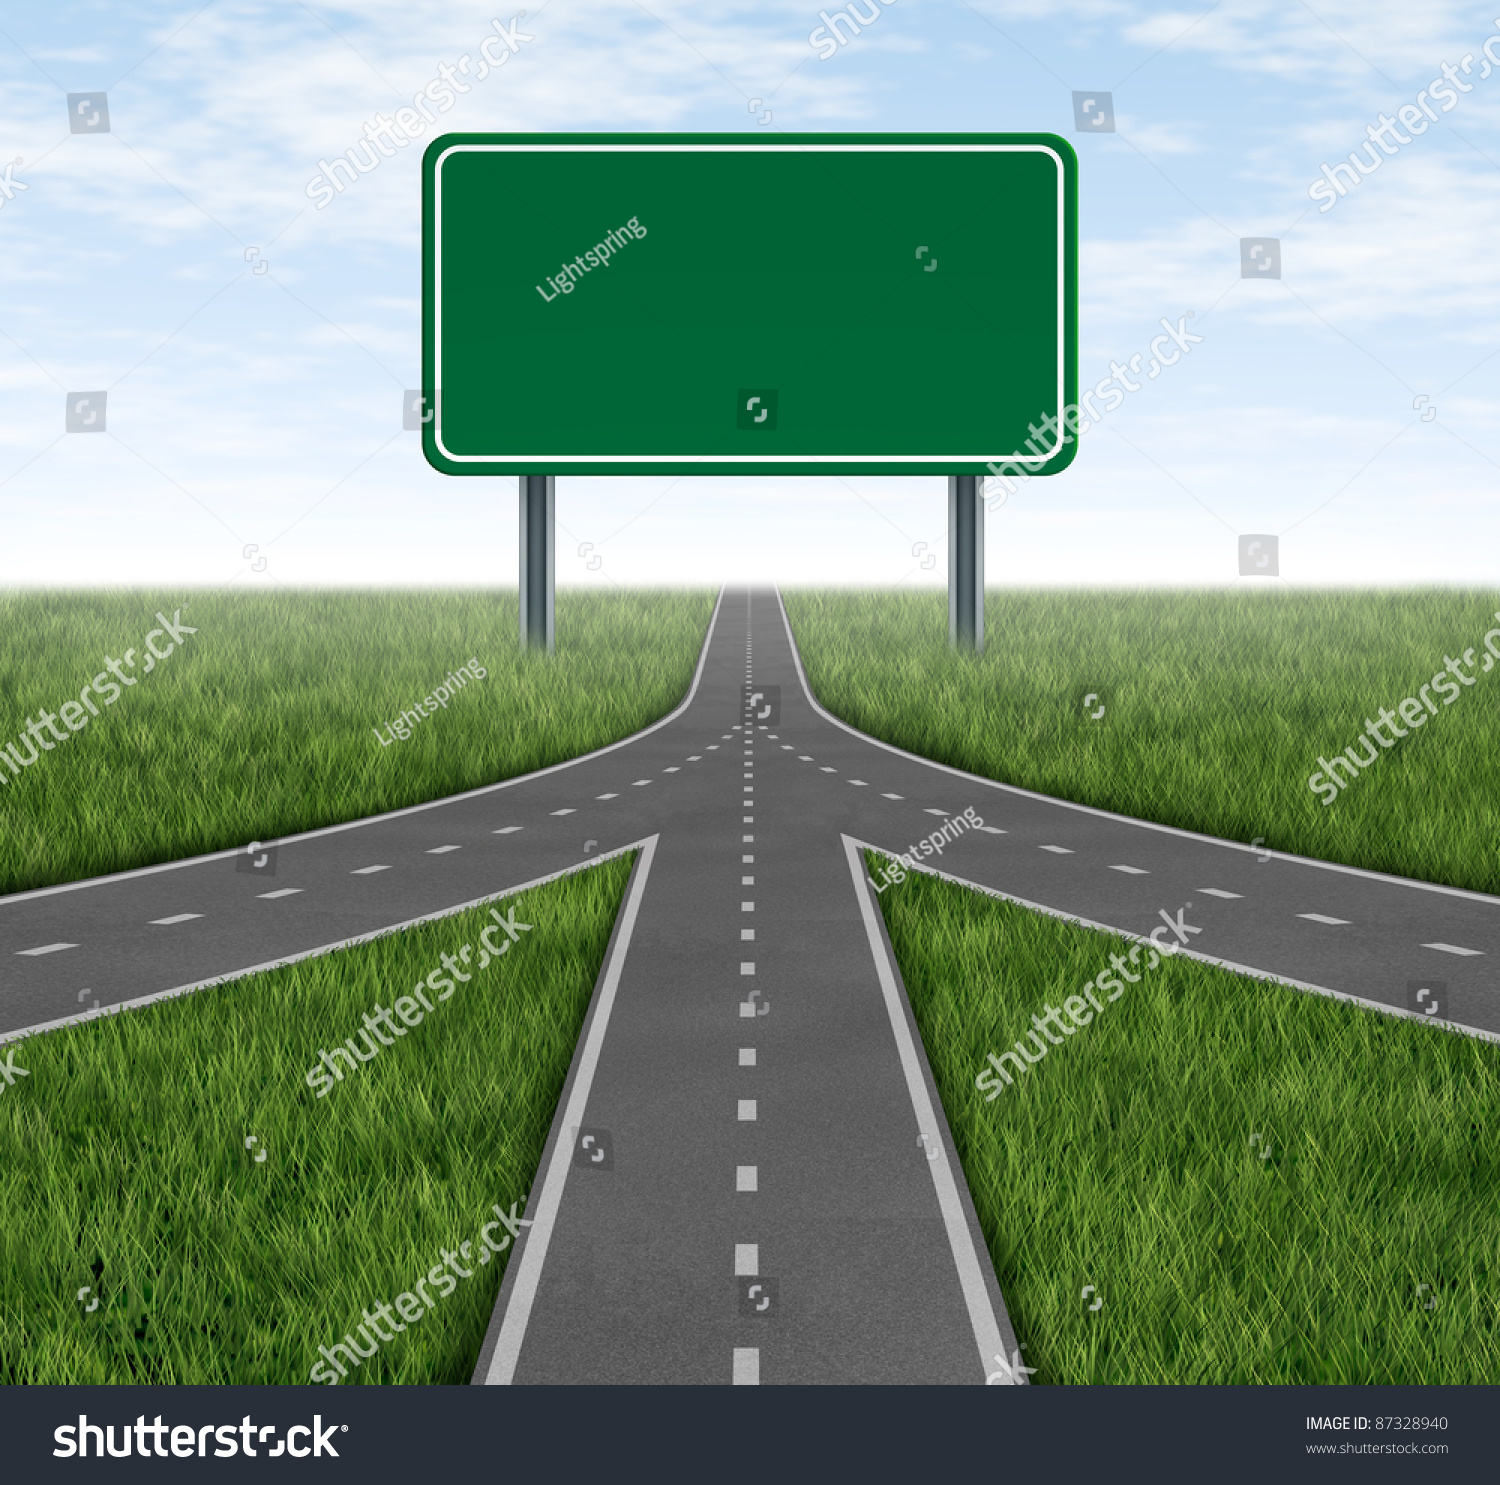 Teamwork and partnerships connecting on the same path as a team sharing the same strategy and vision for the success of a company by working together merging as one with a blank green highway sign. #87328940